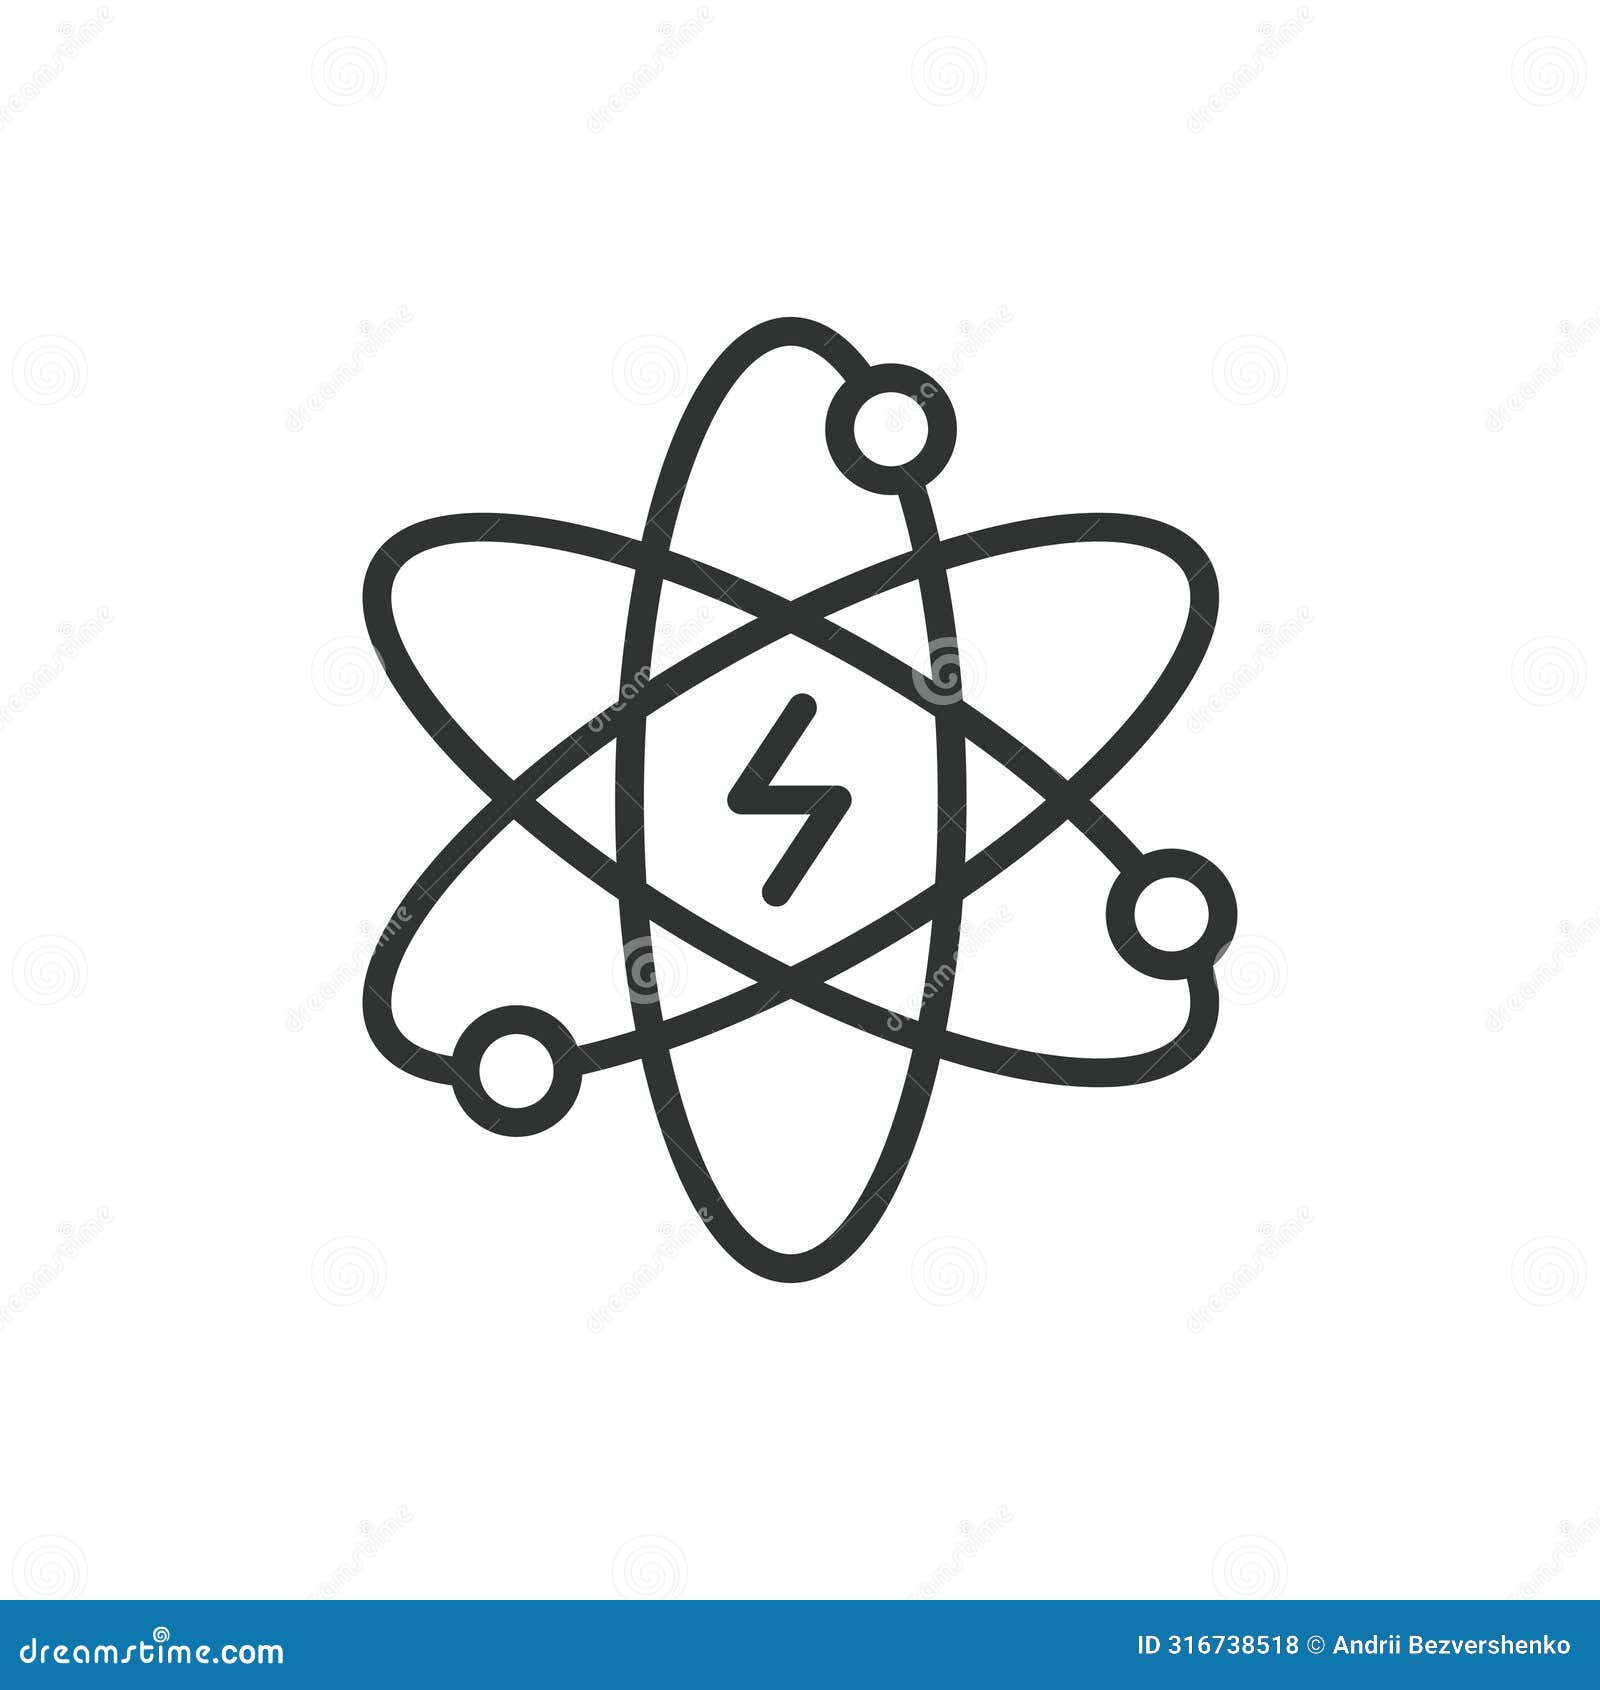 atomic energy, in line . atomic energy, nuclear, power, reactor, uranium, fission, radiation on white background